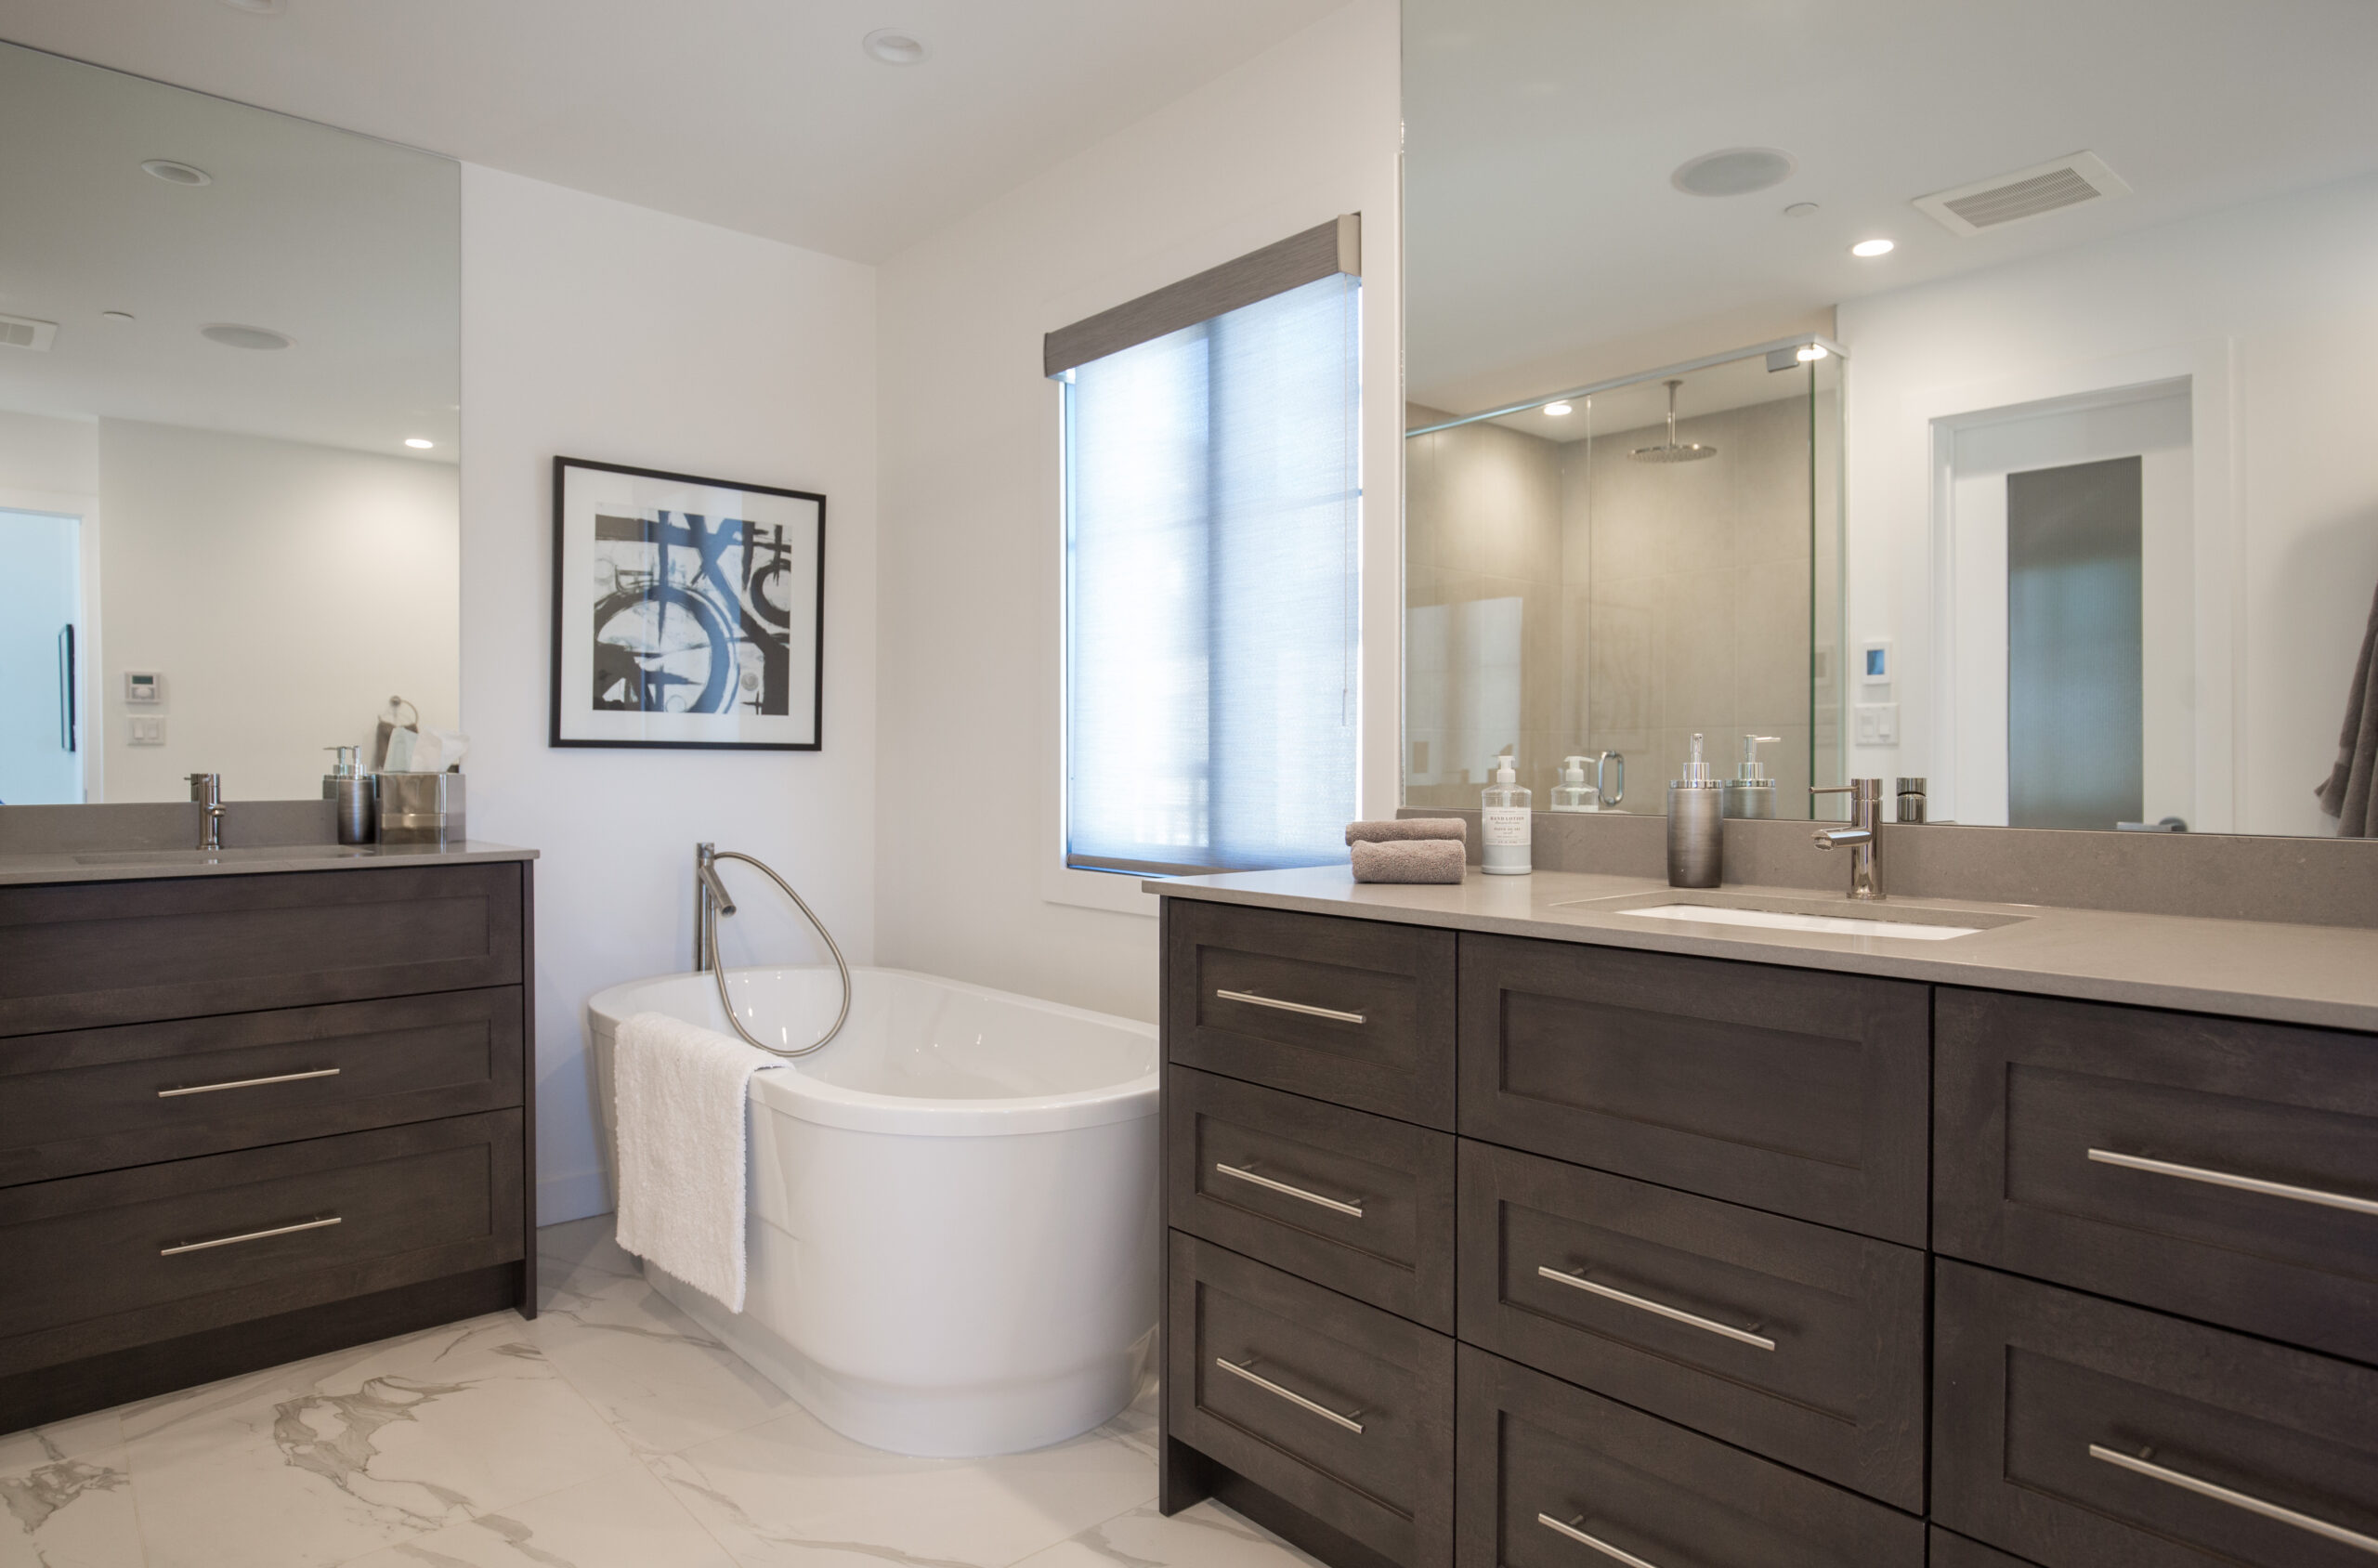 Large bathroom renovation with two dark wood vanities with large mirrors, and large corner soaker tub